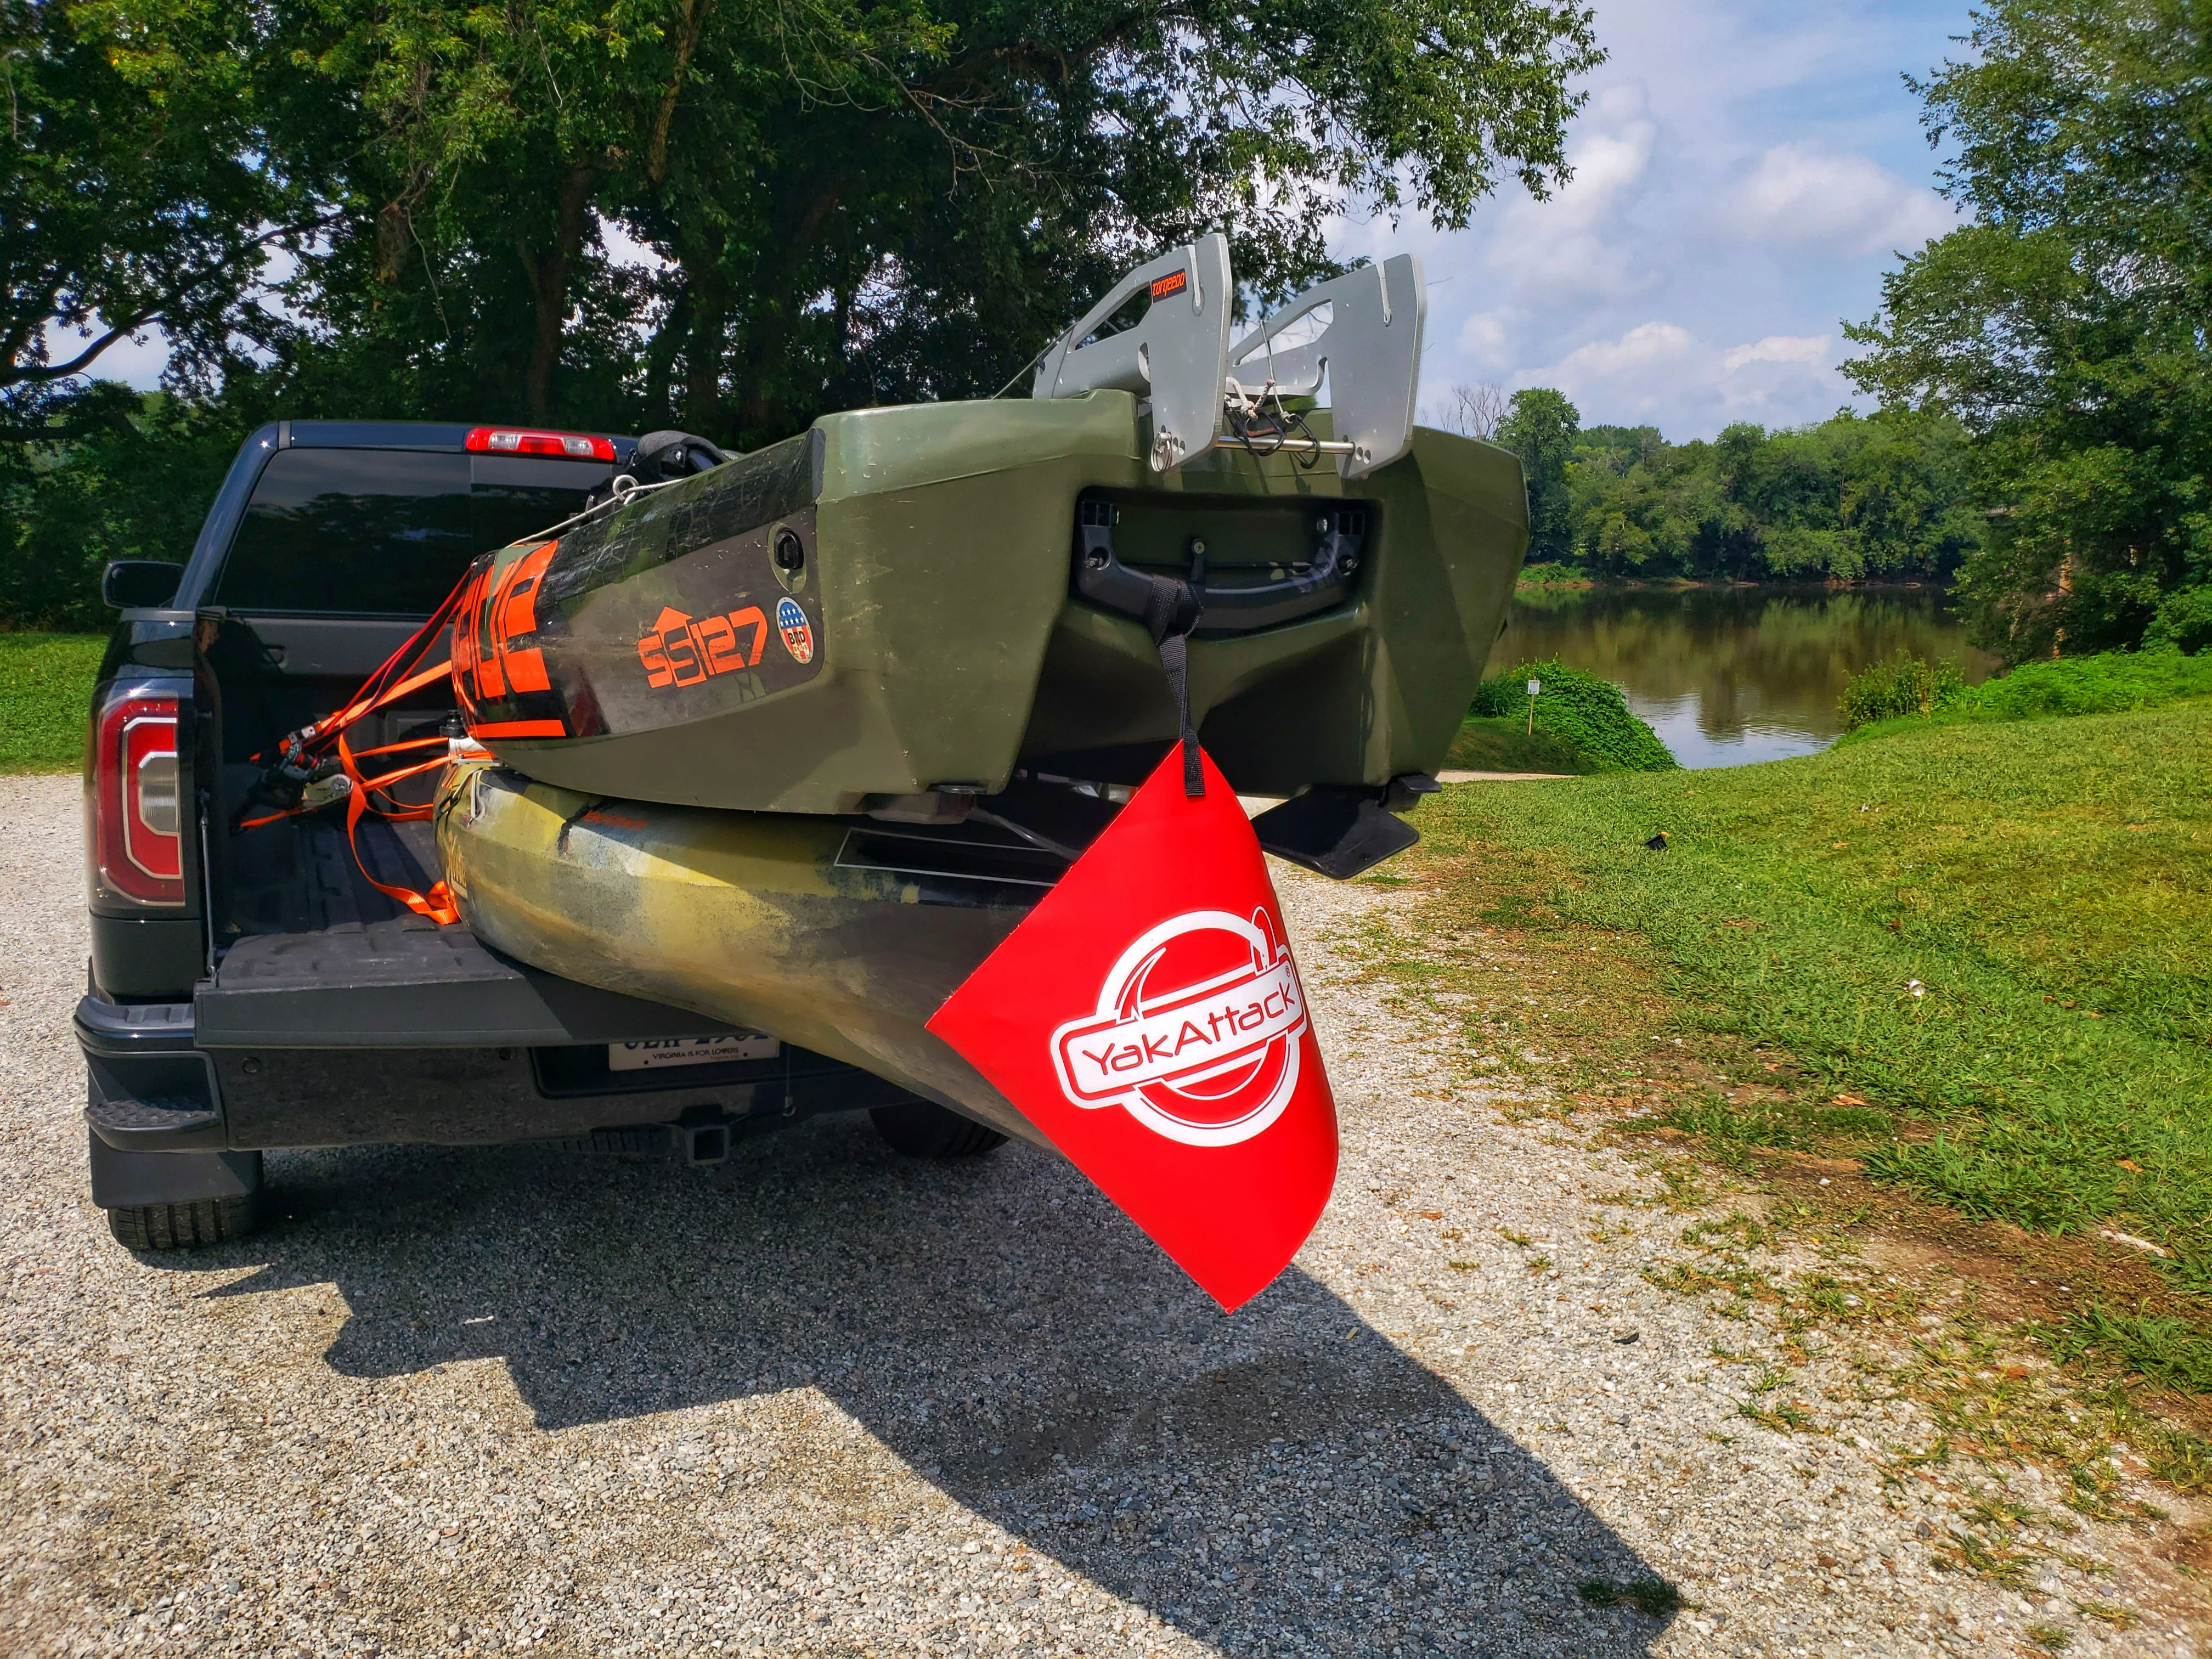 In most states a high visibility tow flag is required when transporting kayaks in the back of truck bed.